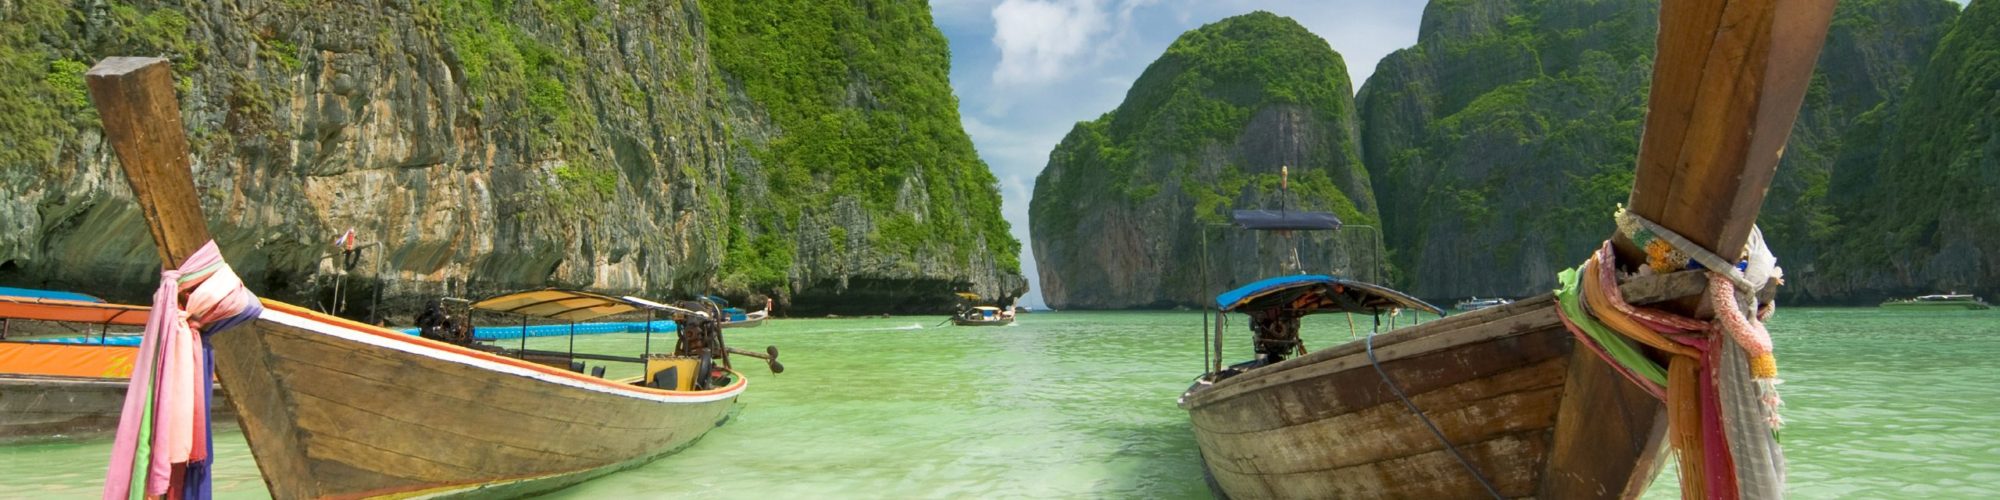 Phuket travel agents packages deals